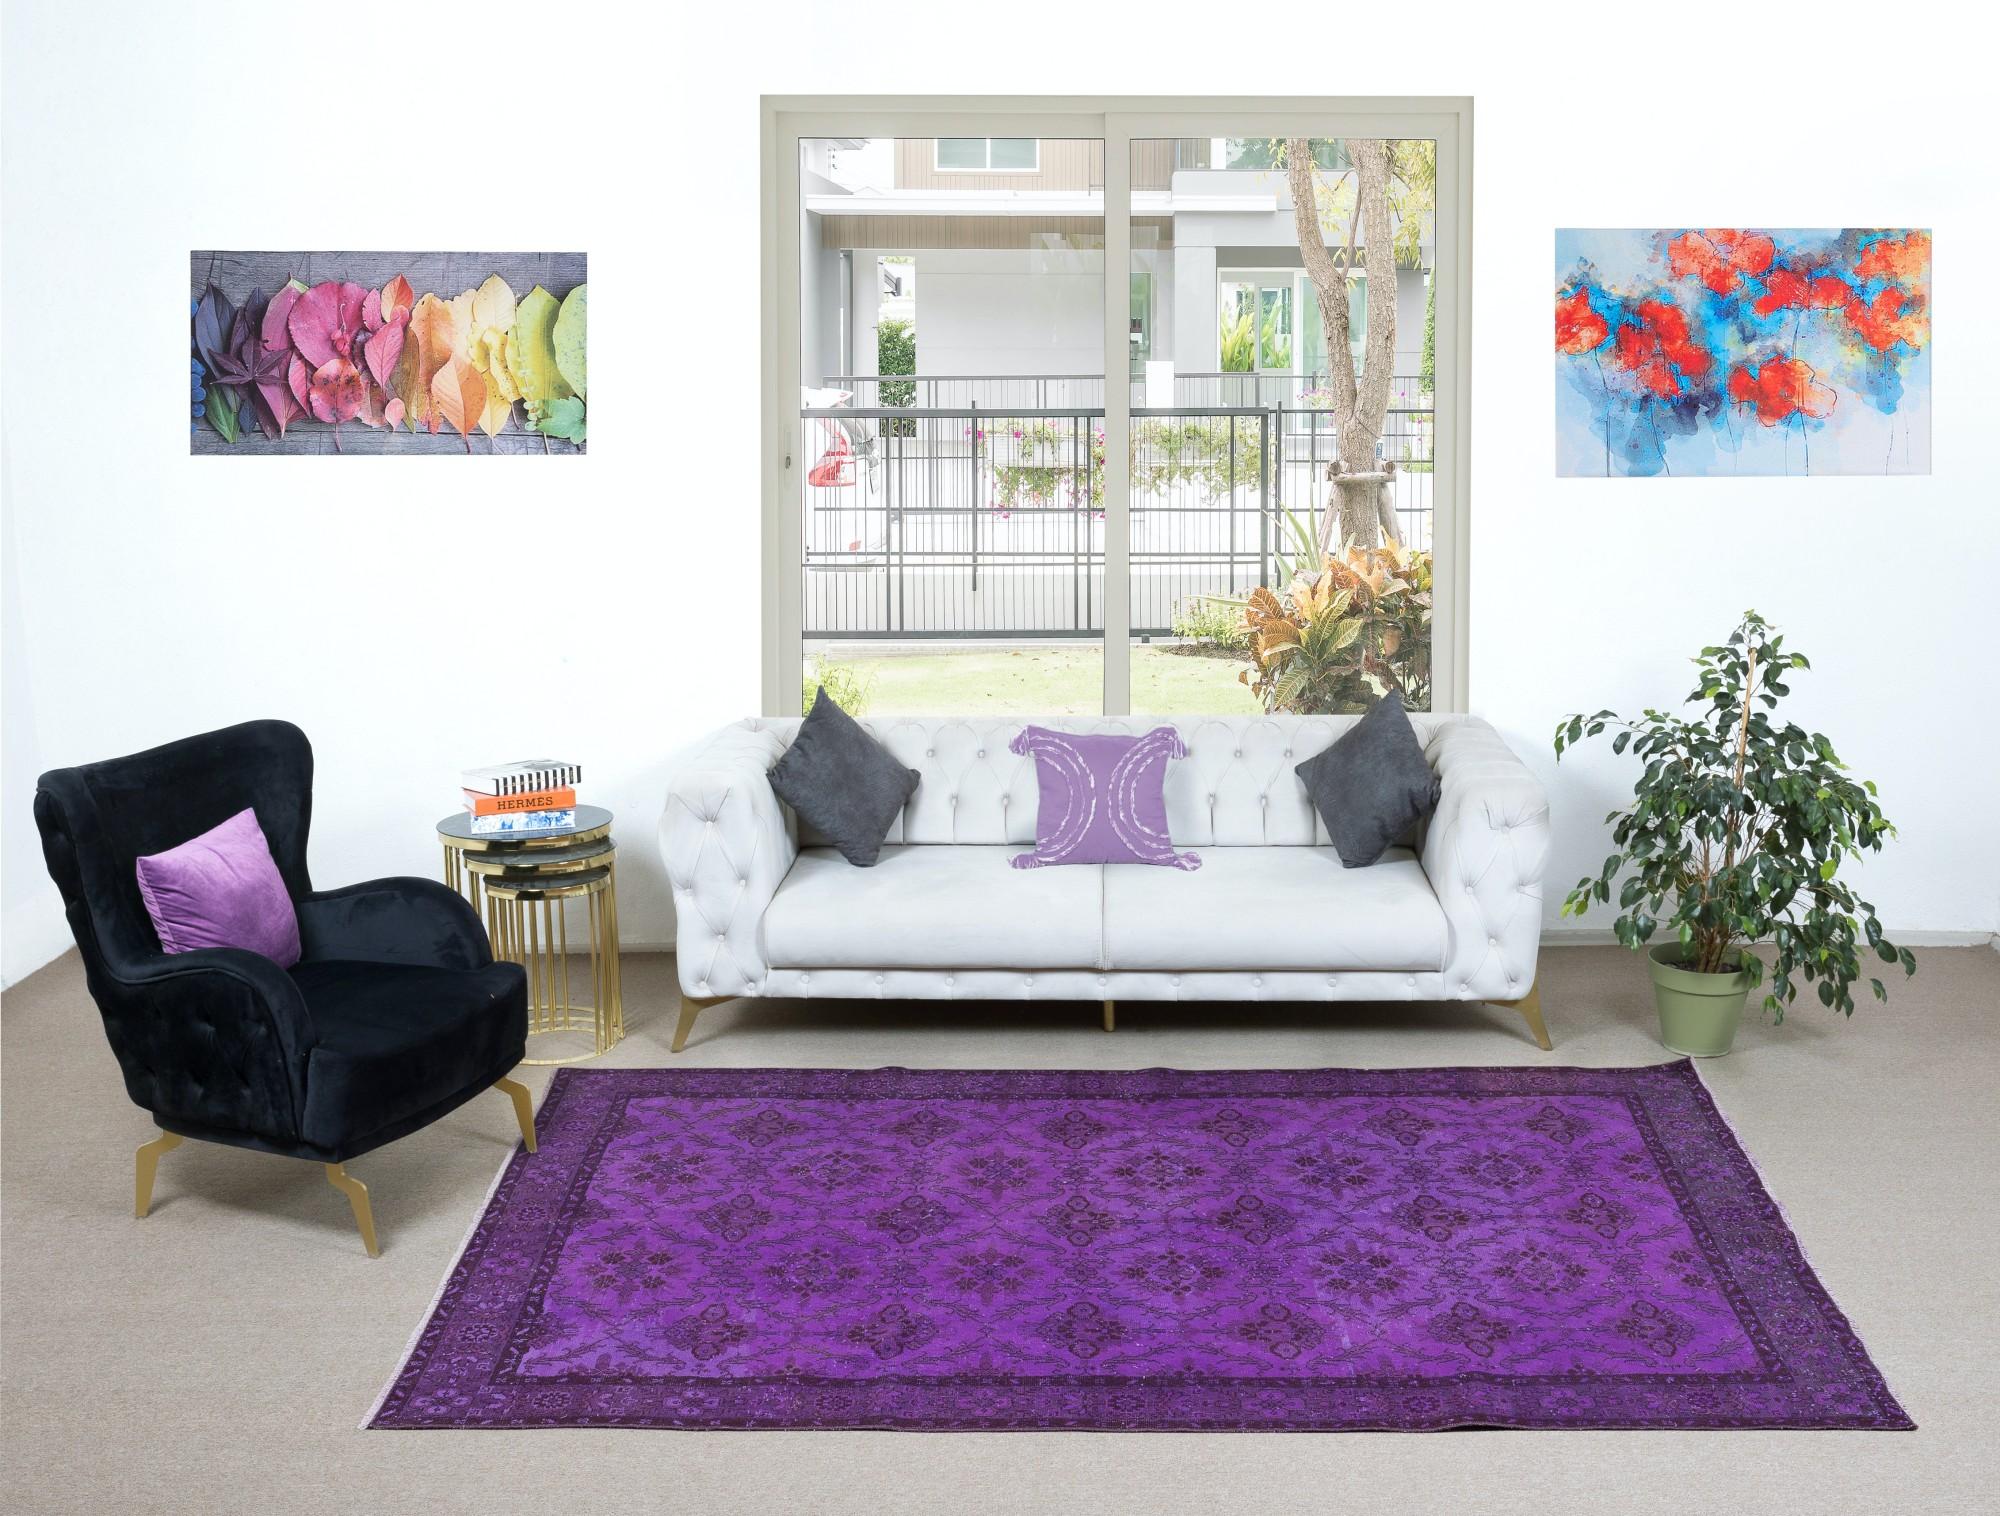 Hand-Woven 6.2x10 Ft Purple Contemporary Area Rug with Floral Design, Handknotted in Turkey For Sale